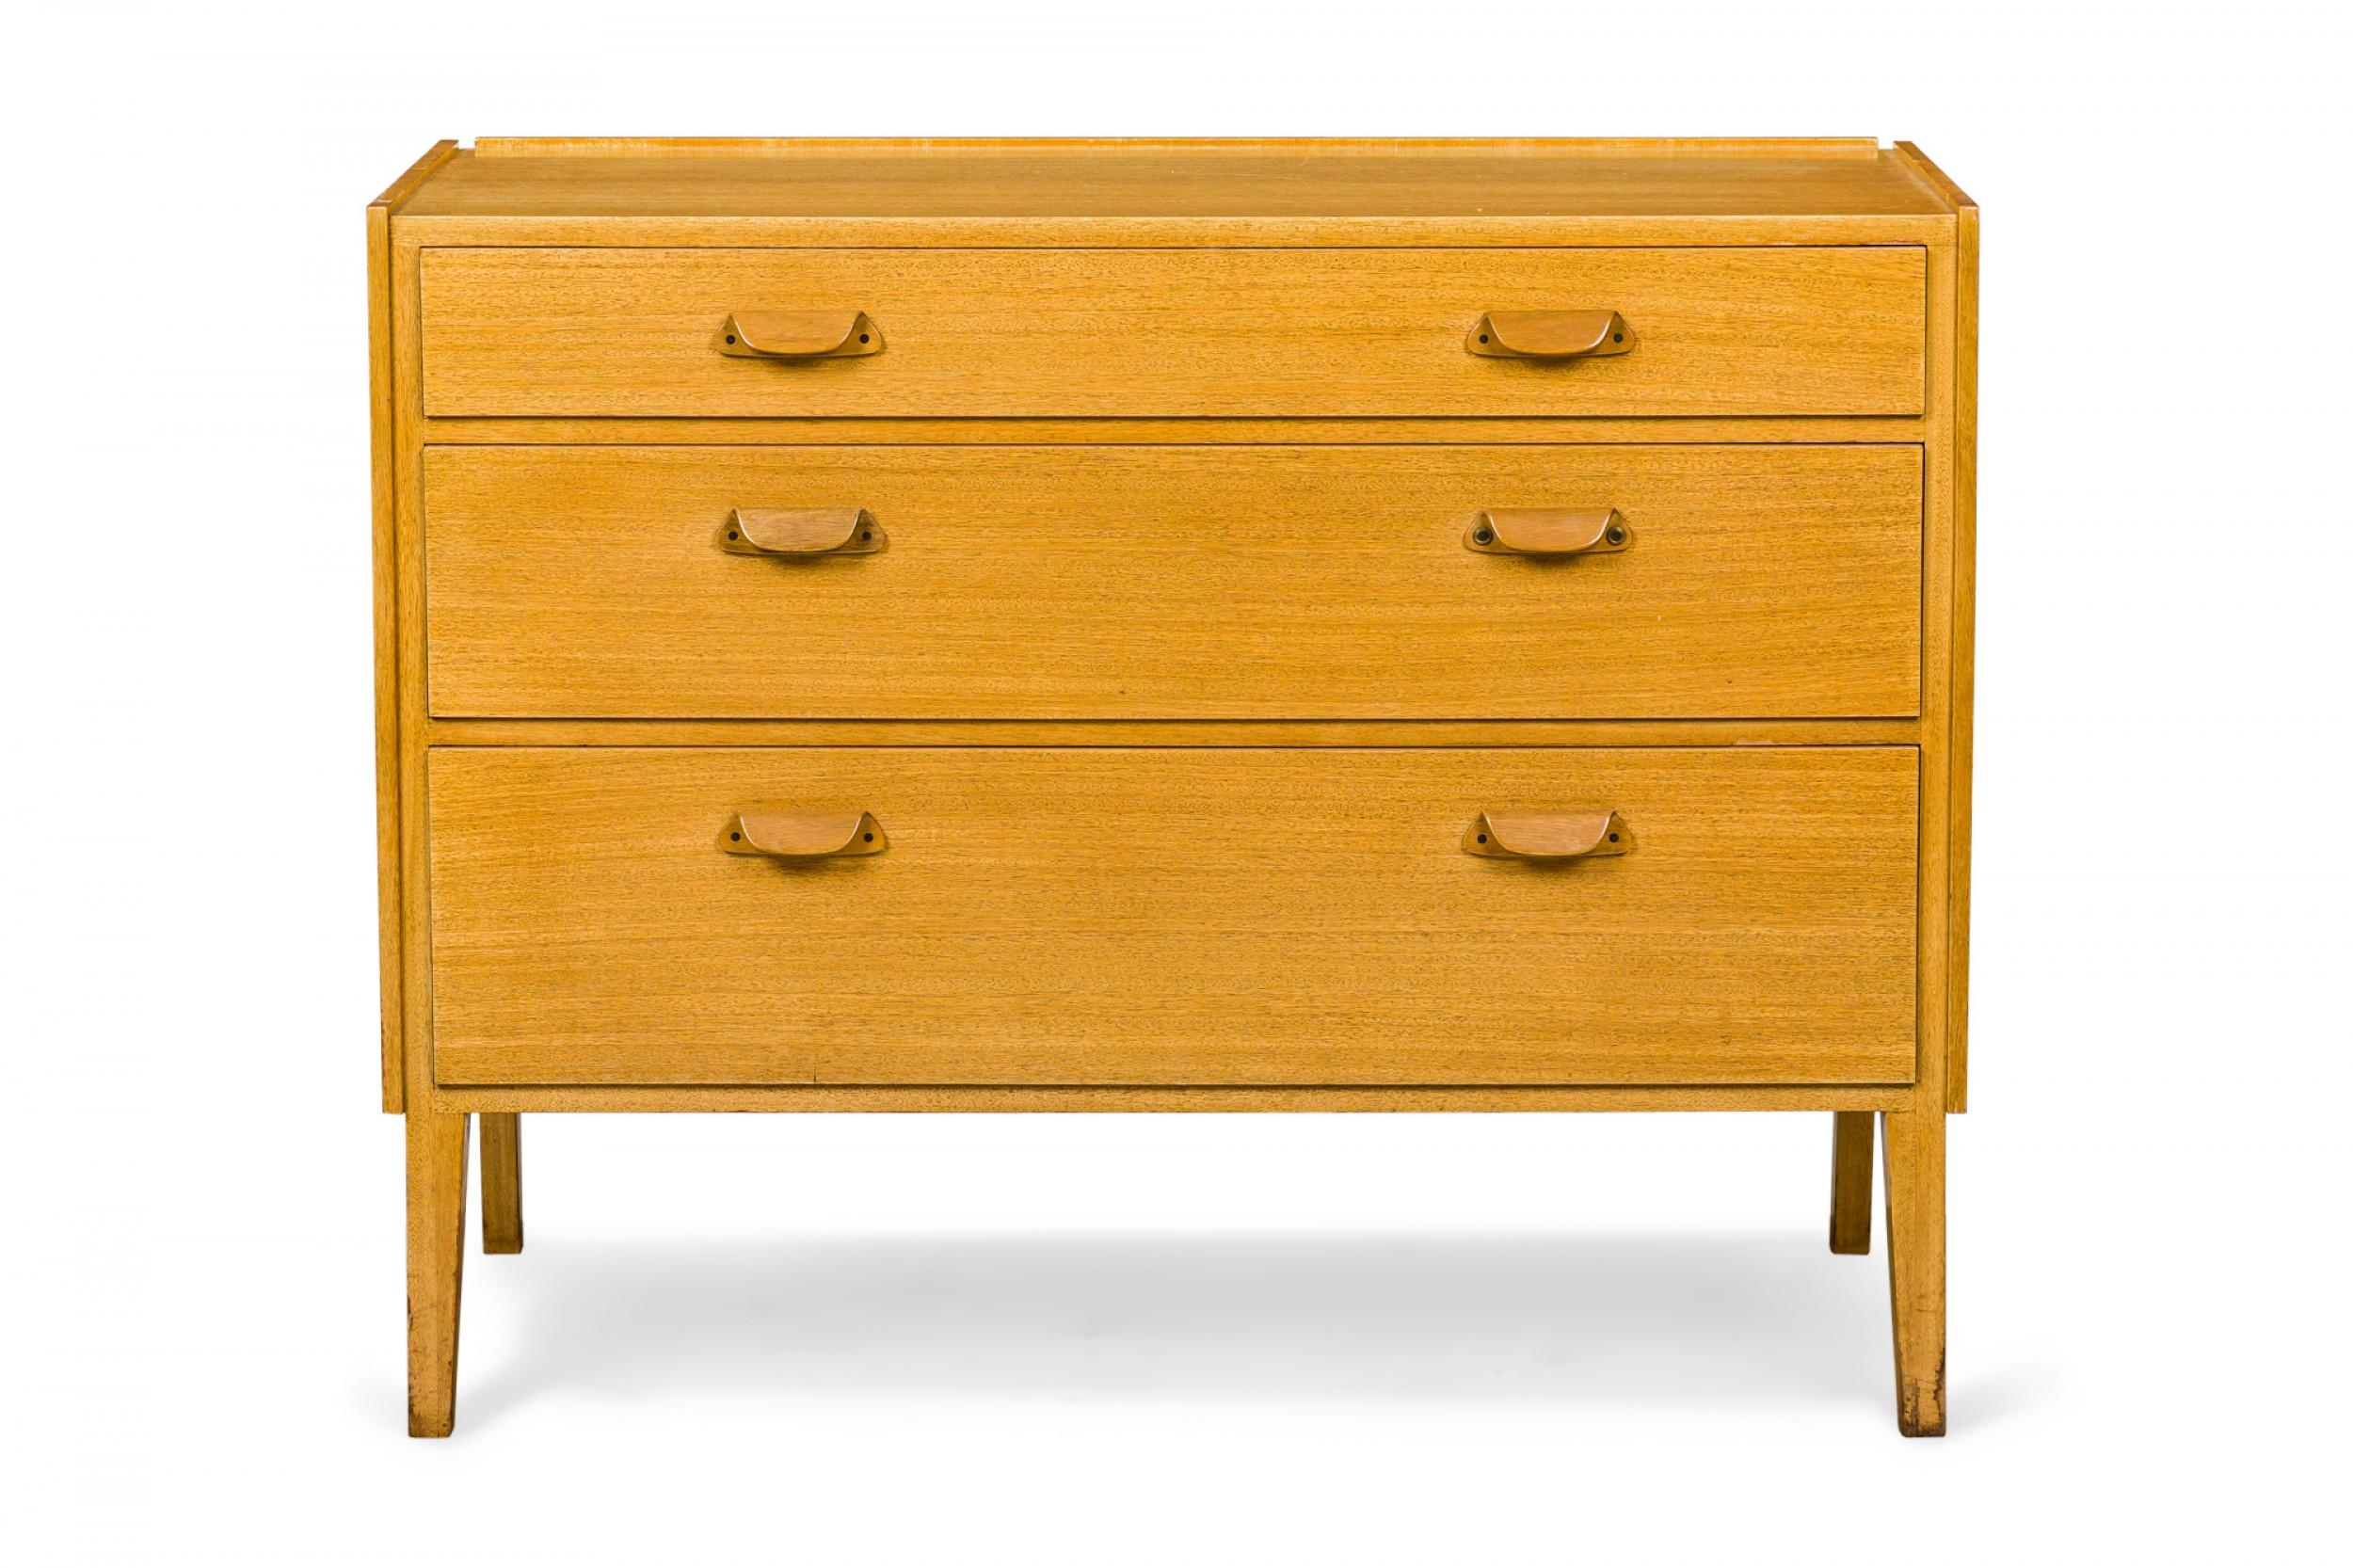 American Mid-Century maple slant front chest with three drawers with semi-circular wooden drawer pulls, resting on four tapered square wooden legs. (EDWARD J WORMLEY FOR DUNBAR FURNITURE COMPANY).